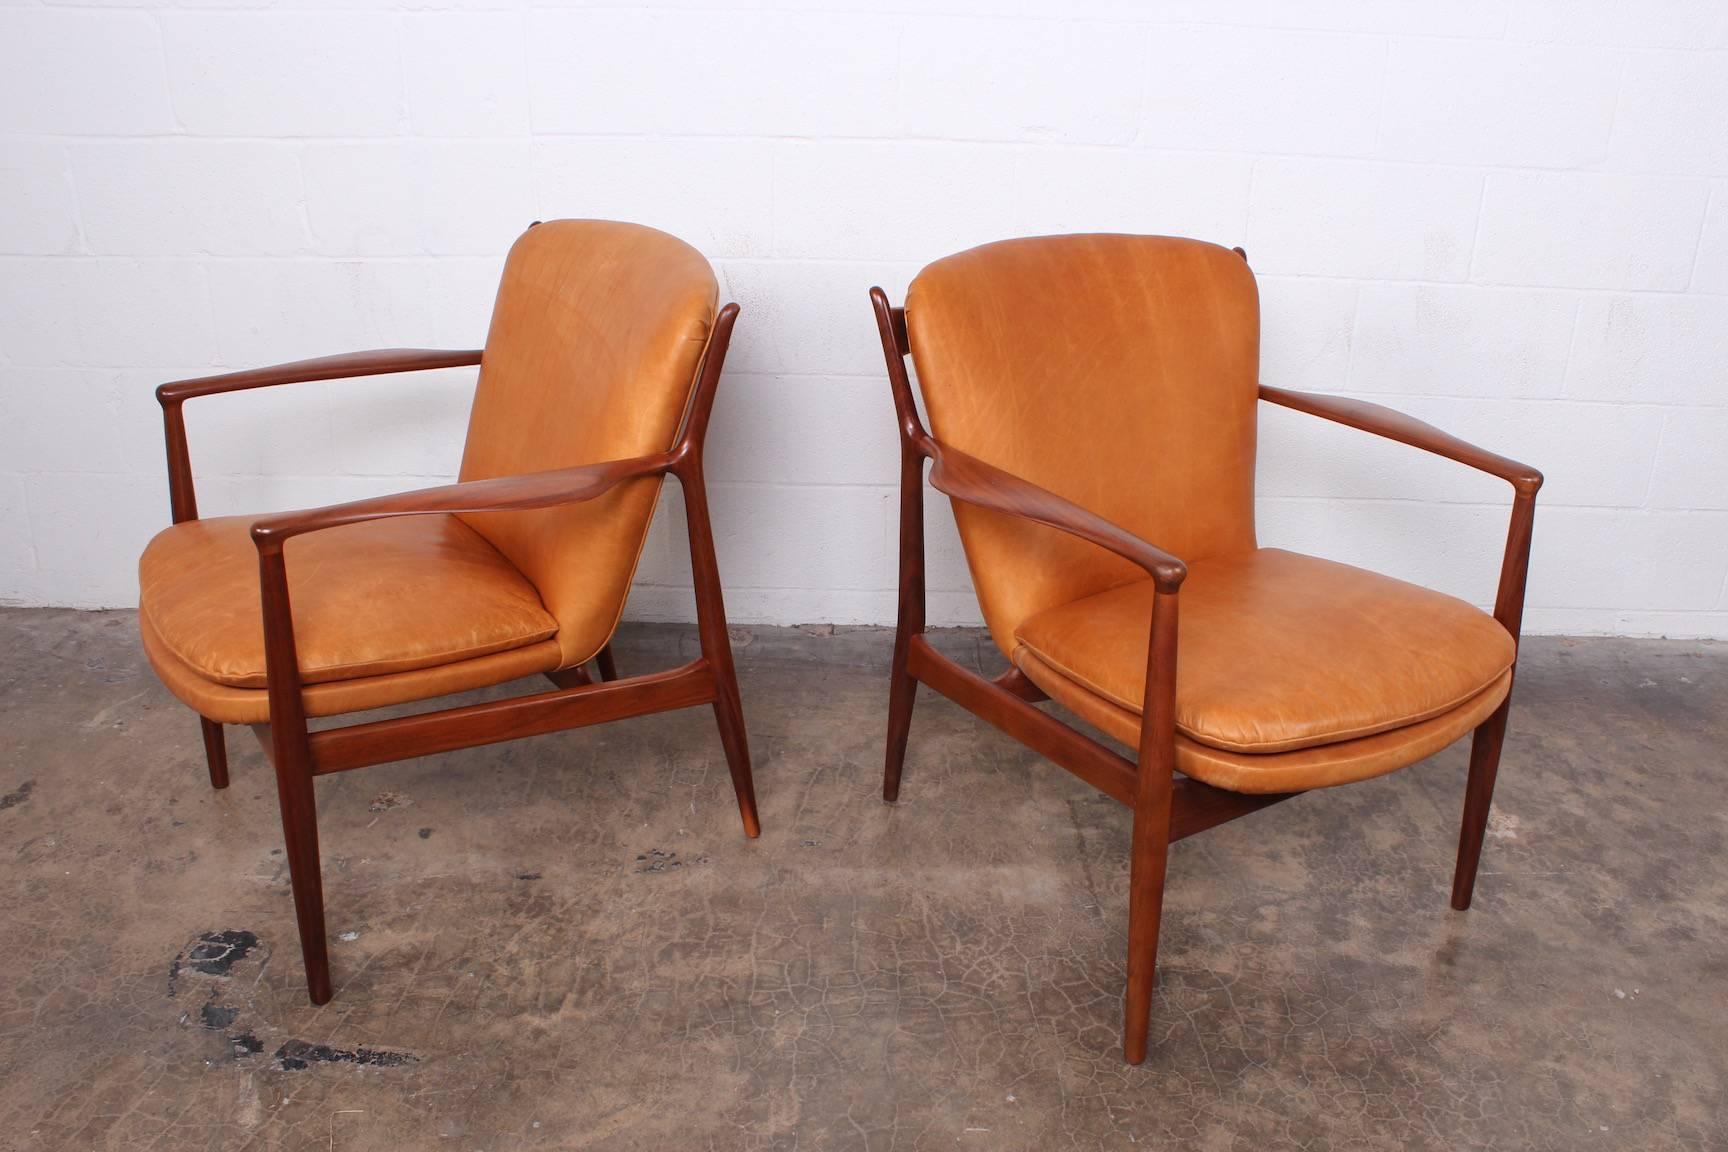 A pair of walnut delegate armchairs designed by Finn Juhl for Baker. Fully restored and upholstered in waxed leather.